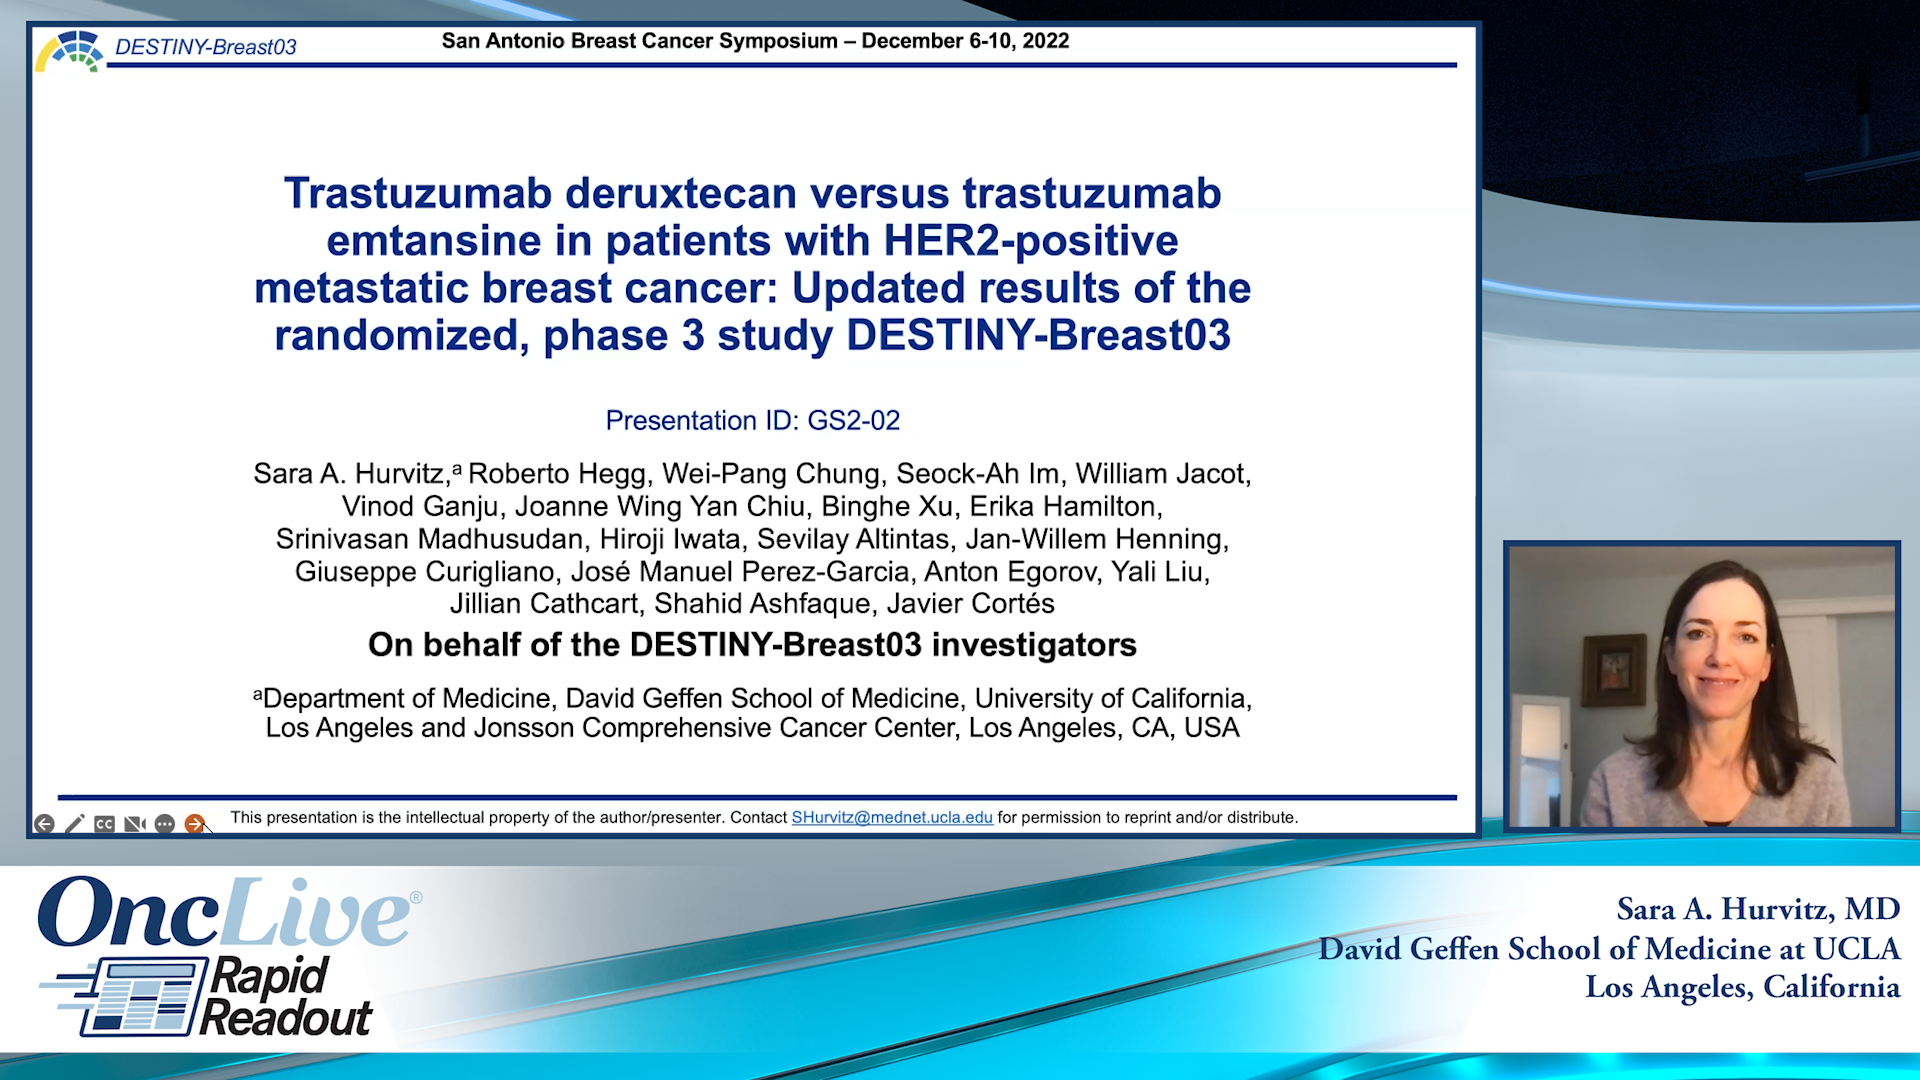 Trastuzumab deruxtecan versus trastuzumab emtansine in patients with HER2-positive metastatic breast cancer: Updated results of the randomized, phase 3 study DESTINY-Breast03